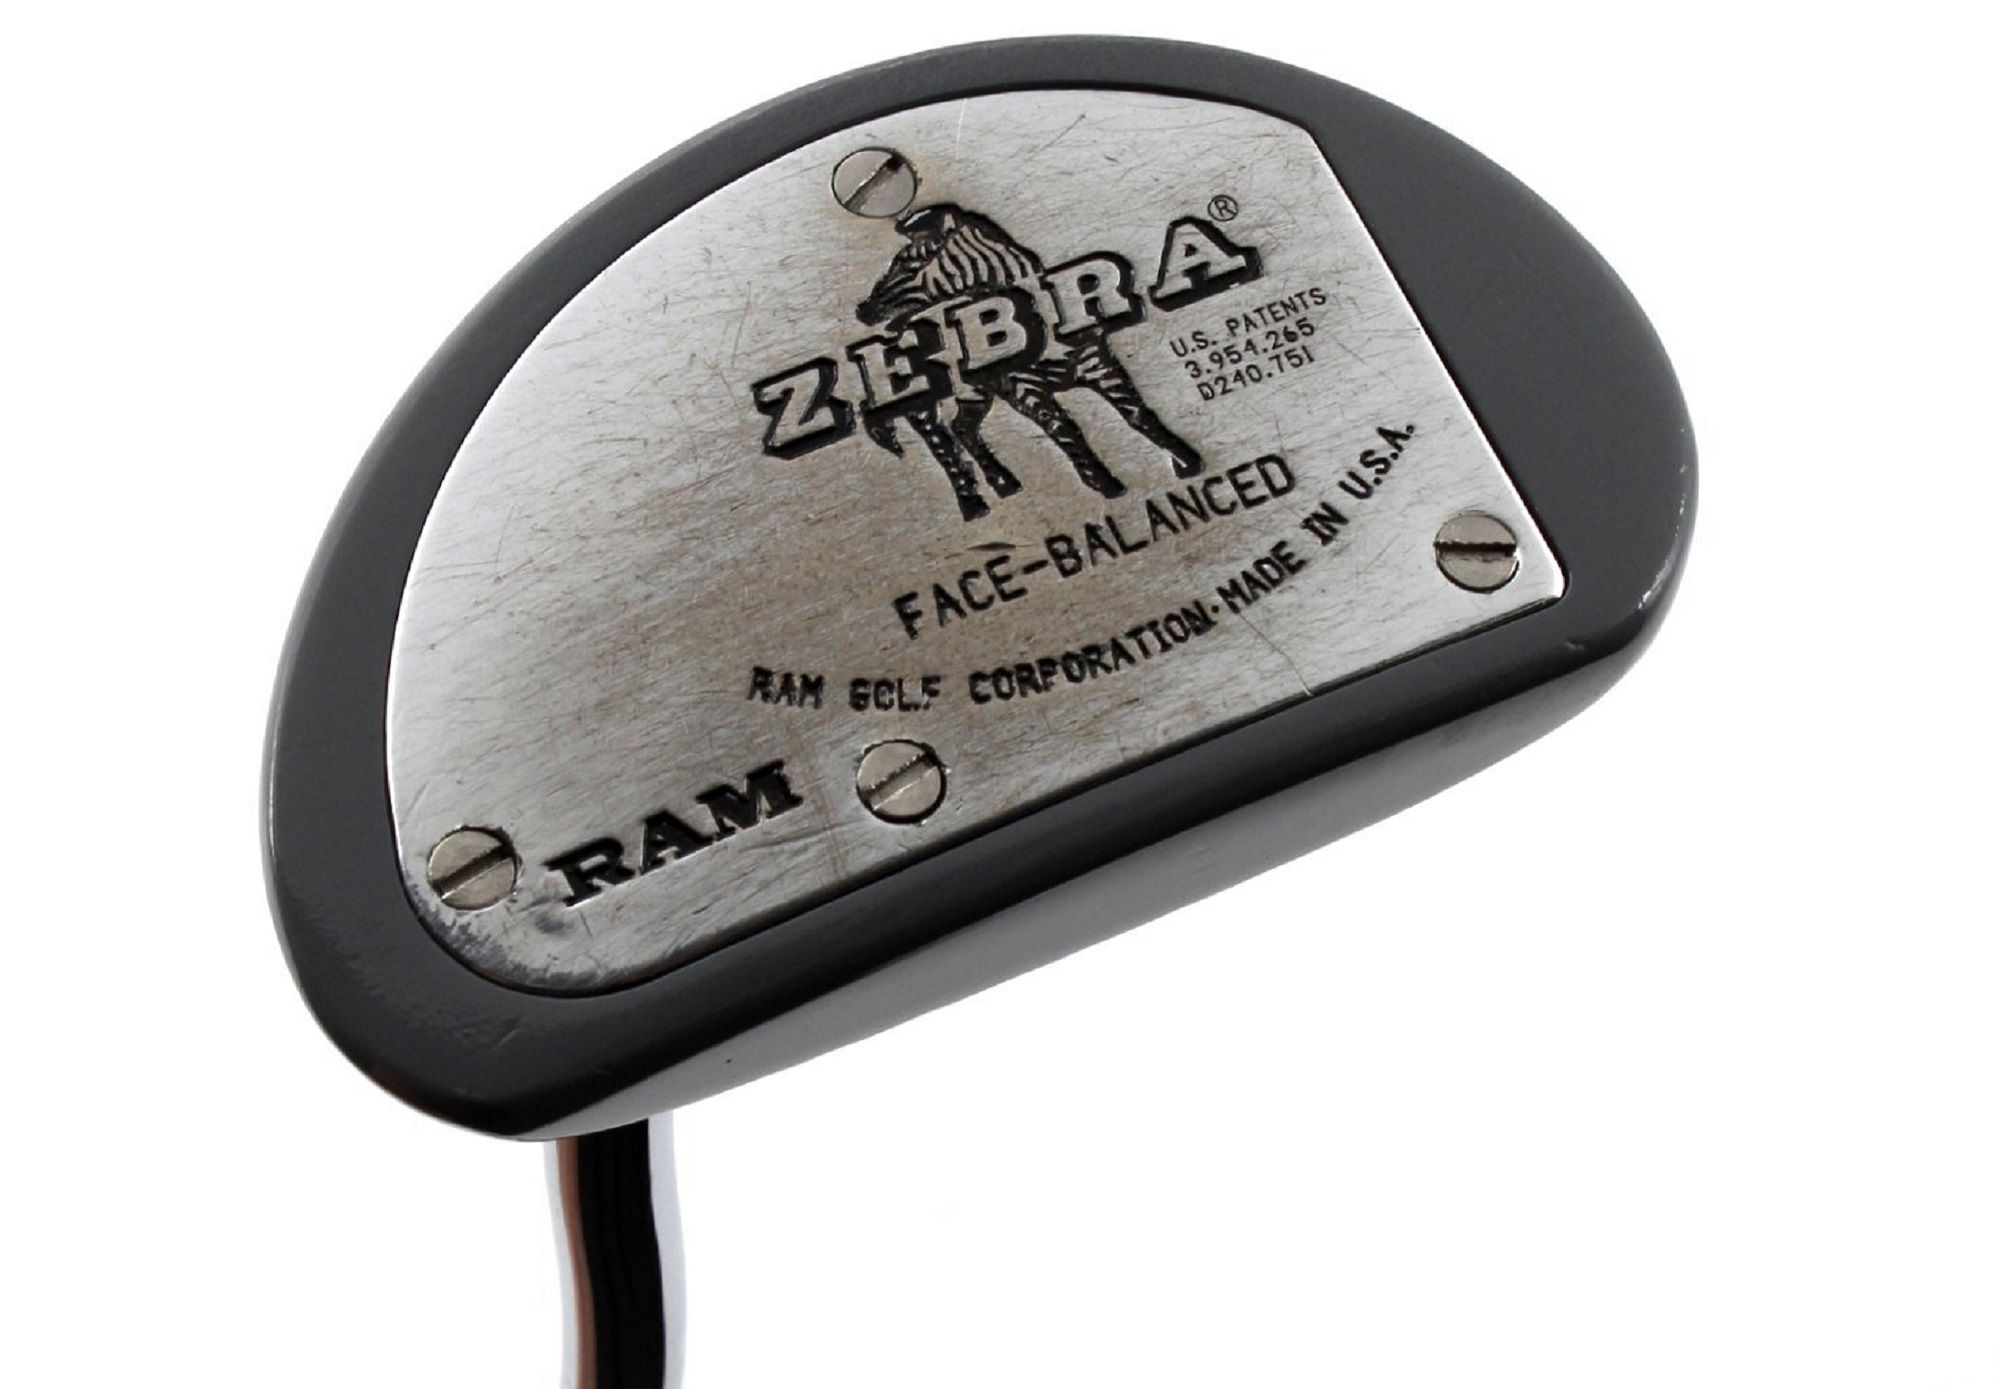 a bottom view of the original Zebra putter from 1976